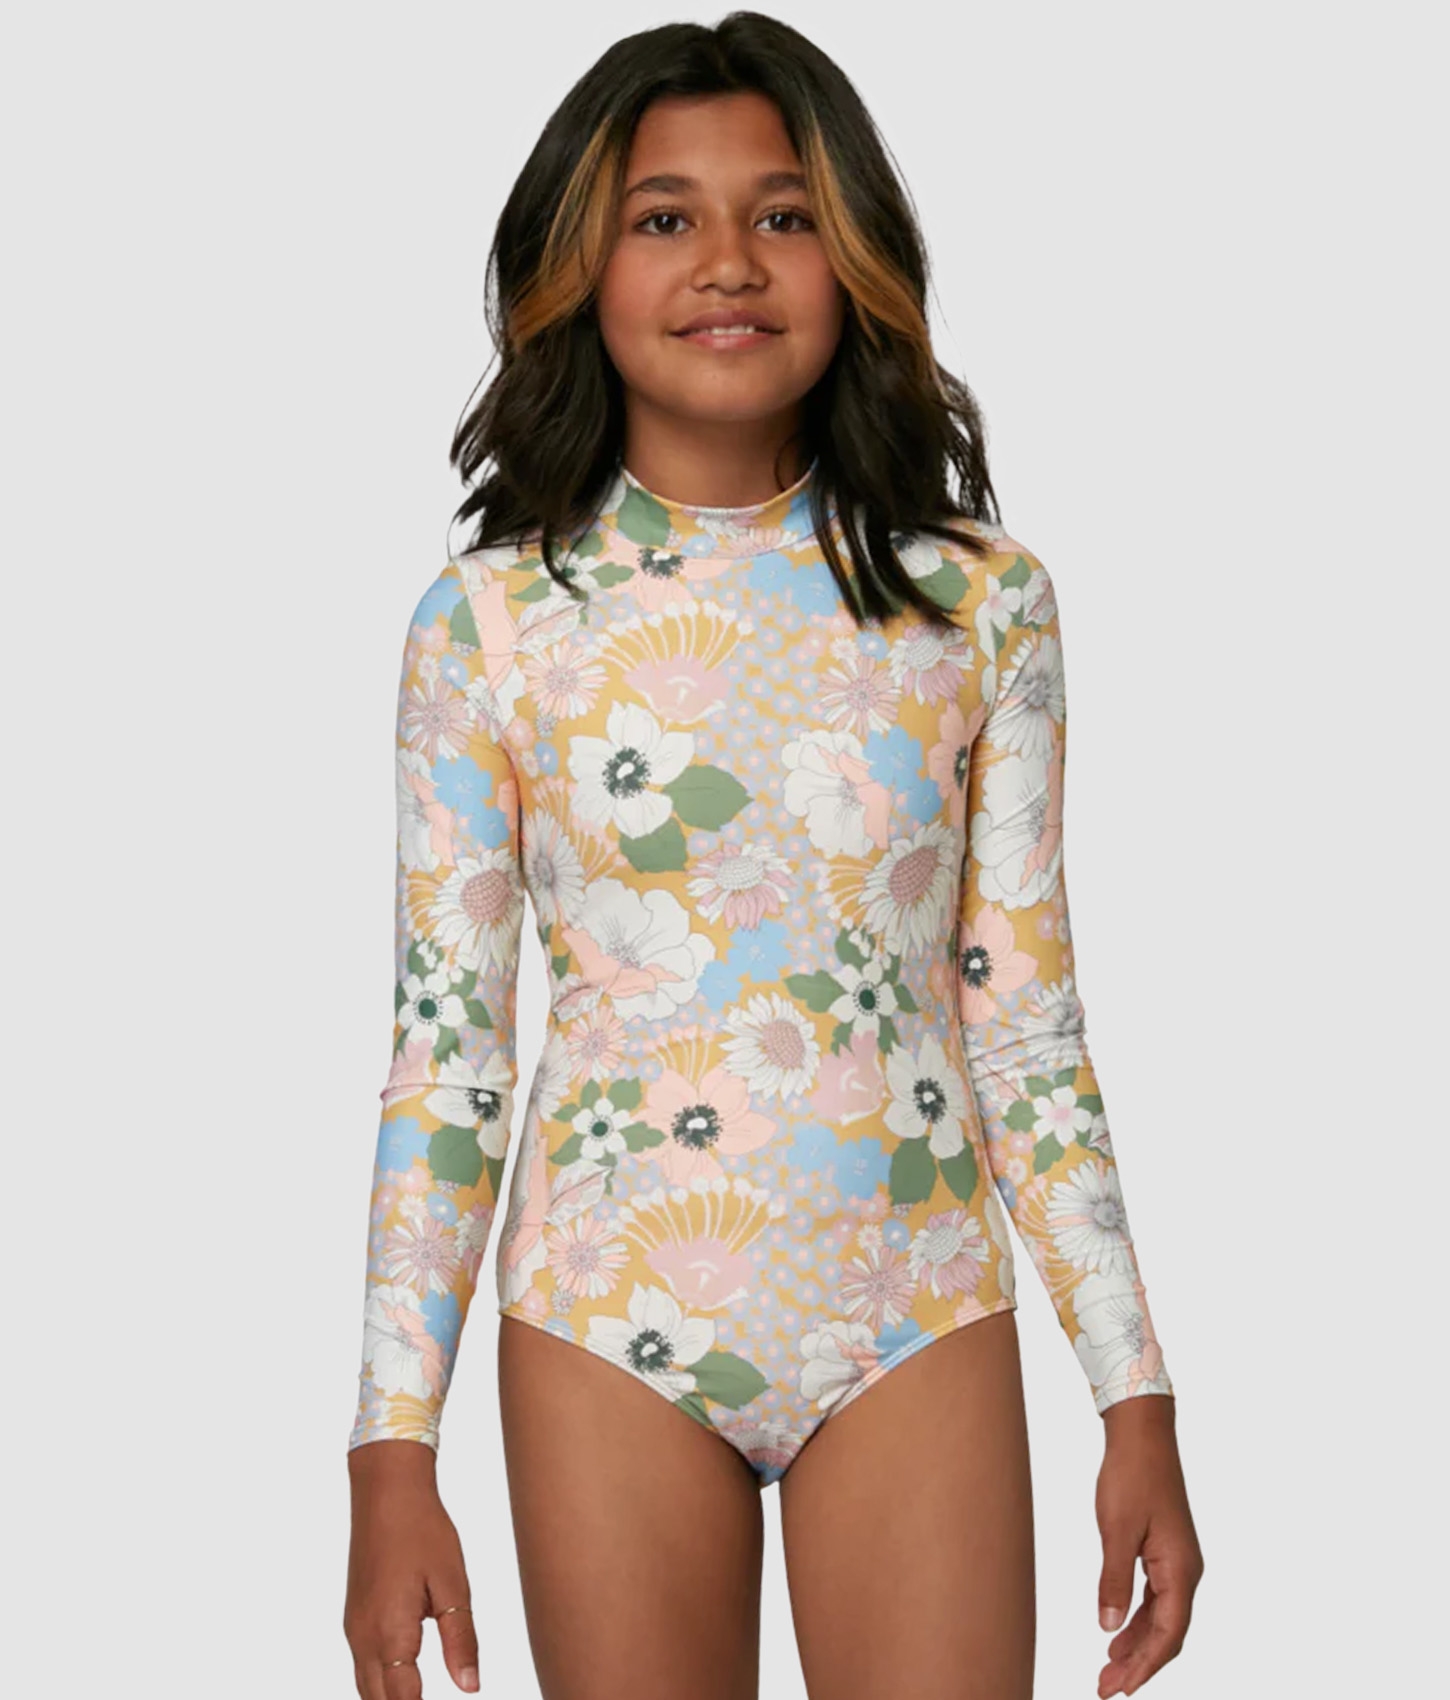 Girls Twiggy Long Sleeve Surf Suit One Piece